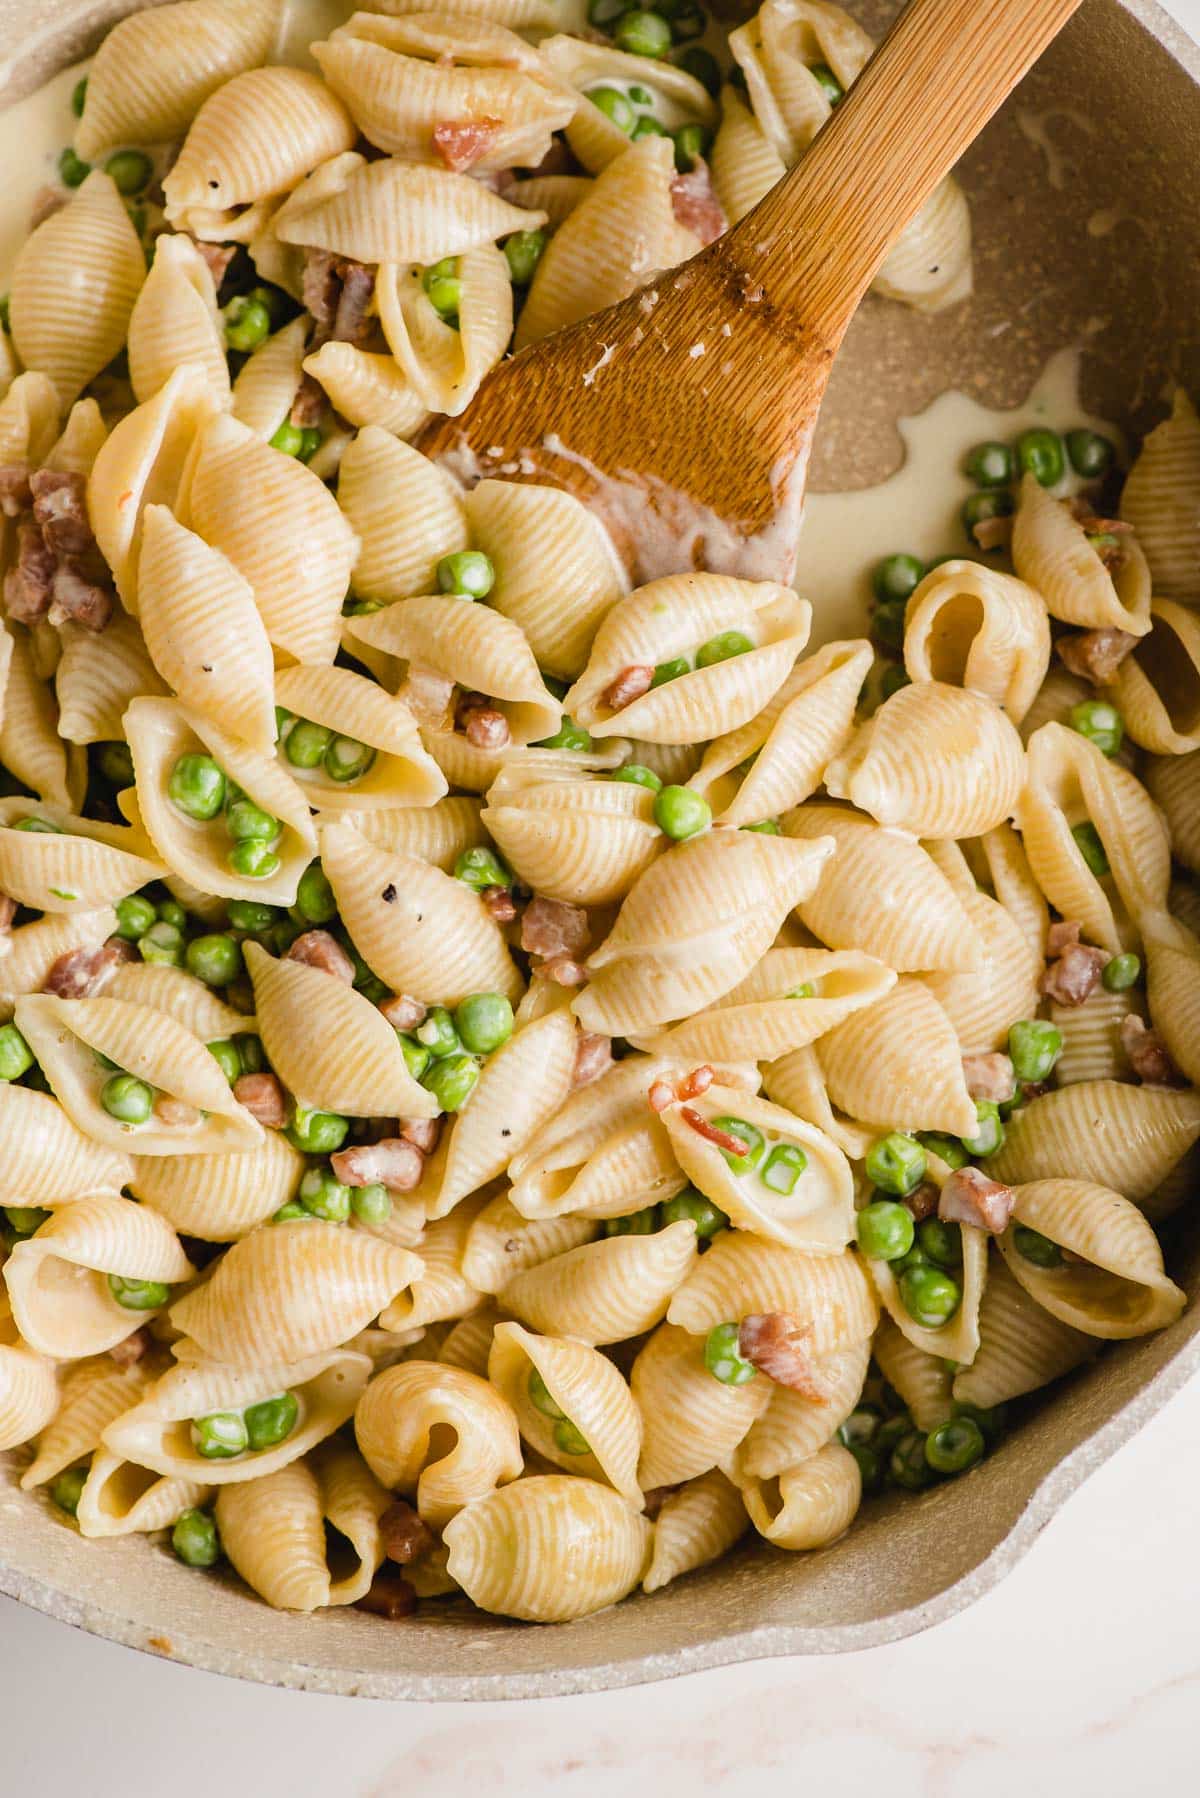 Pasta and peas stirred together by a wooden spoon.